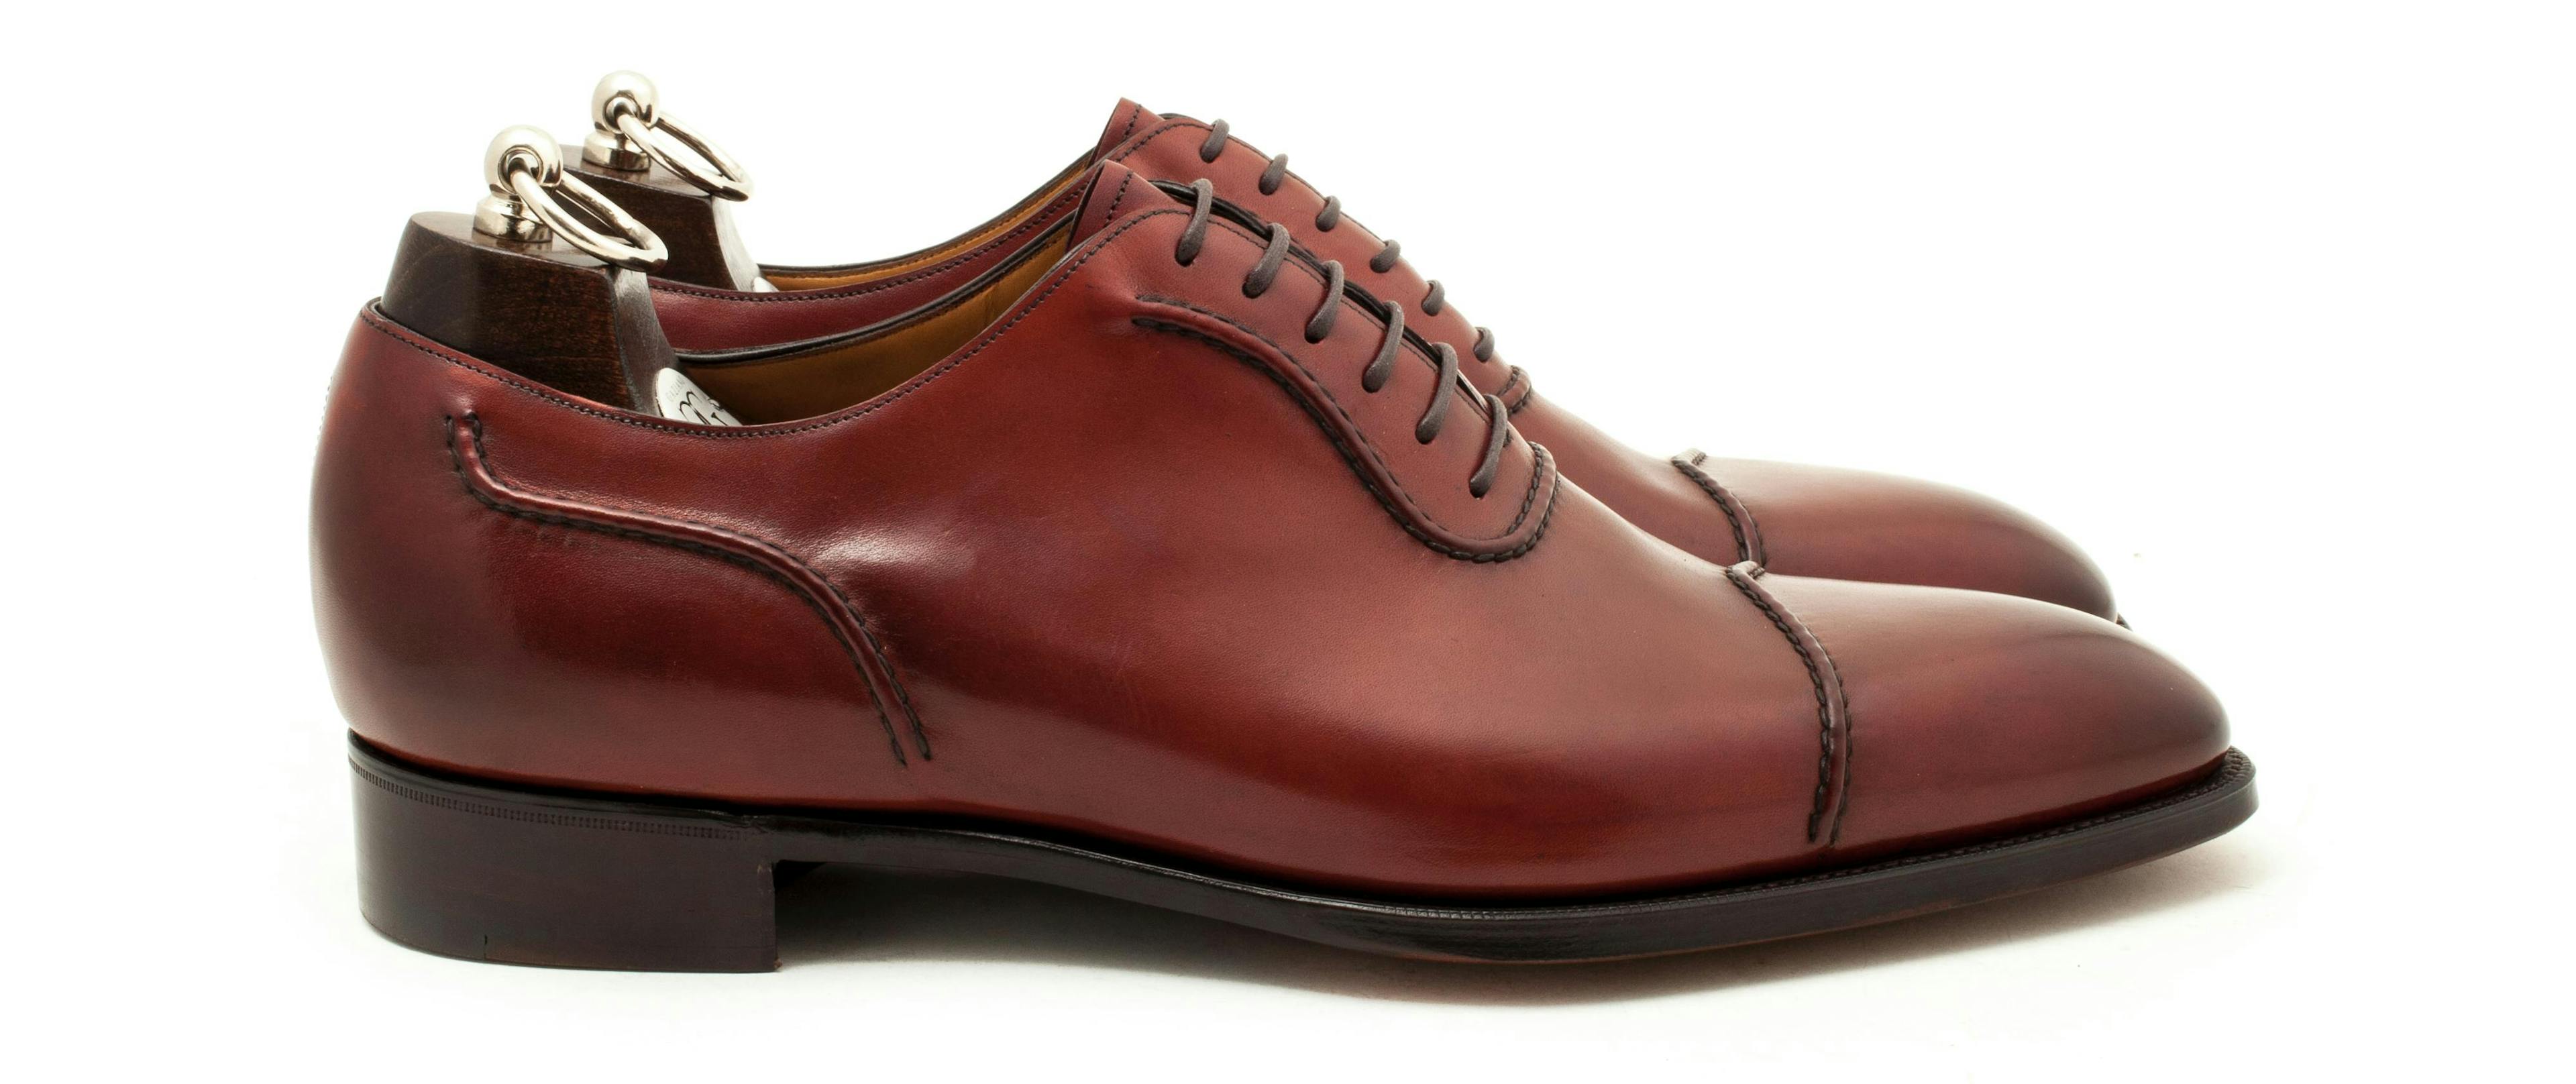 Side view of a Gaziano & Girling Gable in vintage cherry calfskin.